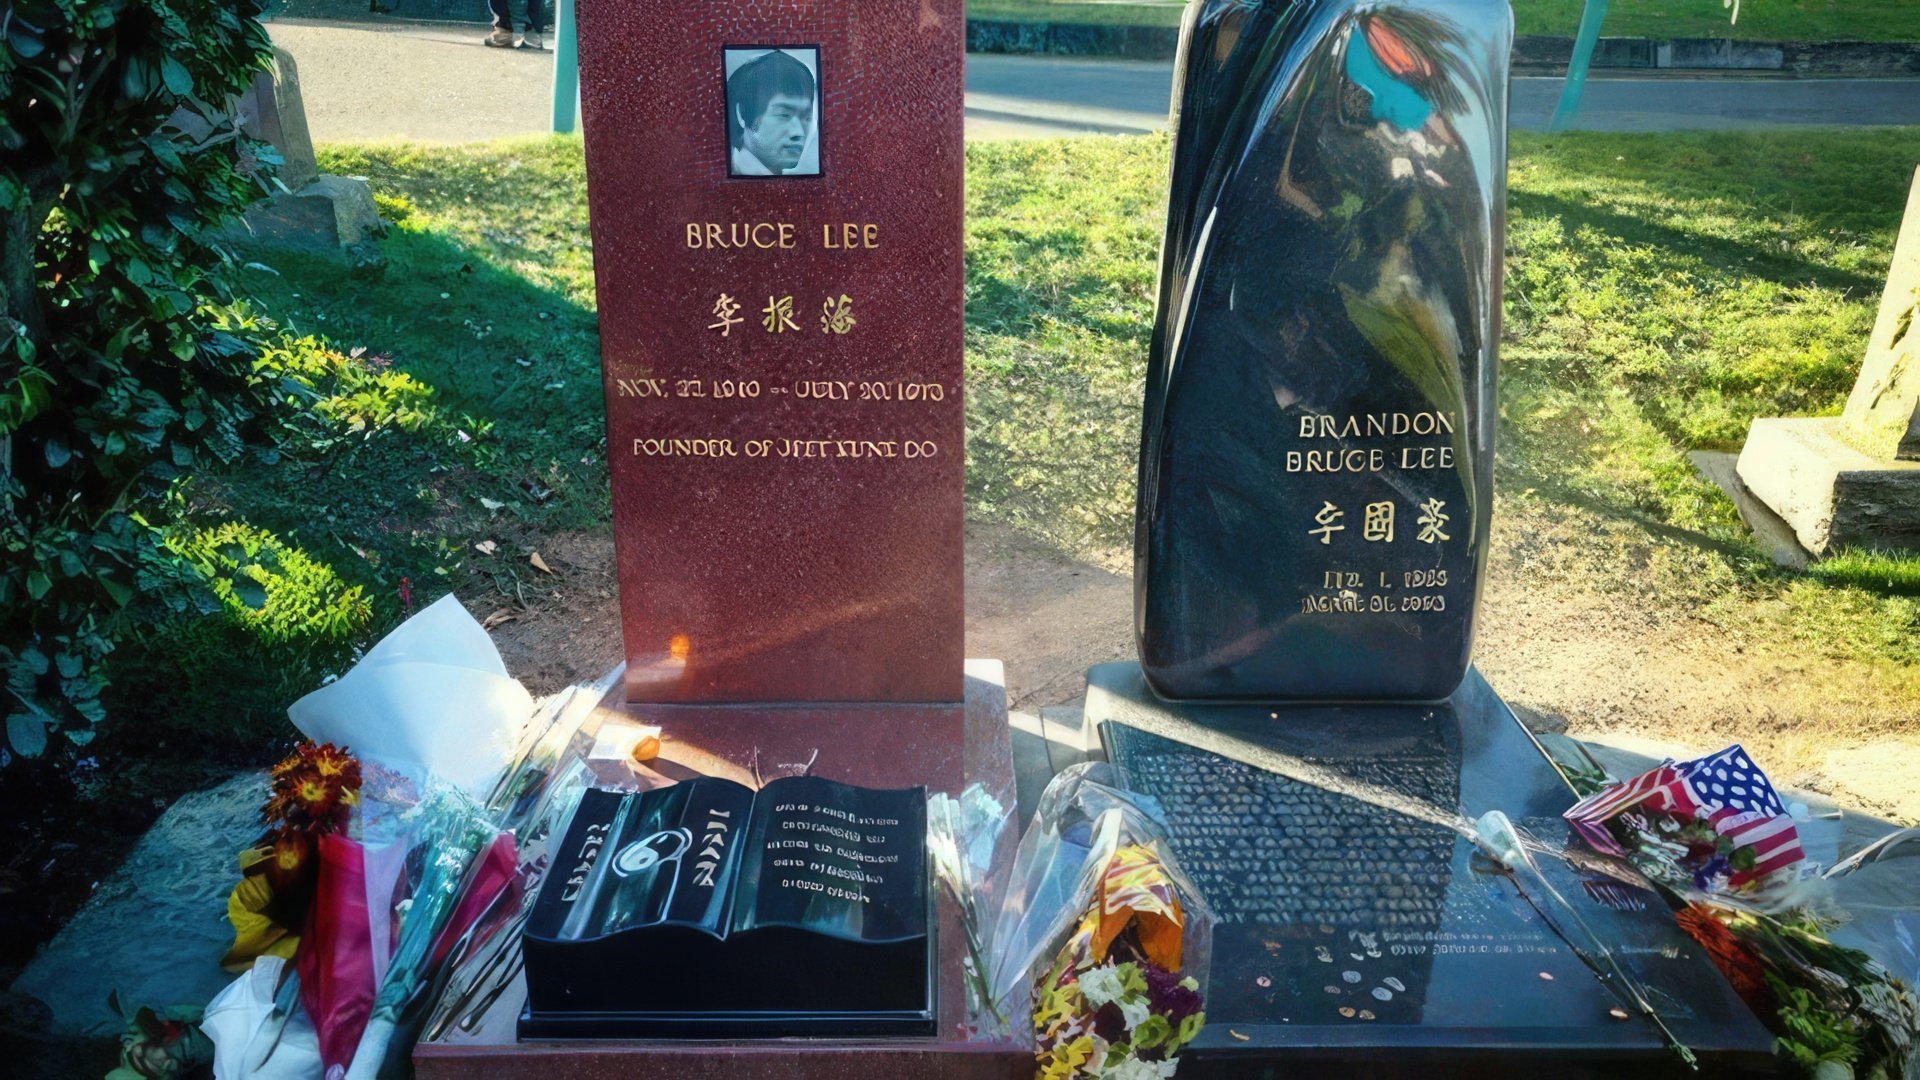 Bruce Lee is buried at the Lakeview Cemetery in Seattle